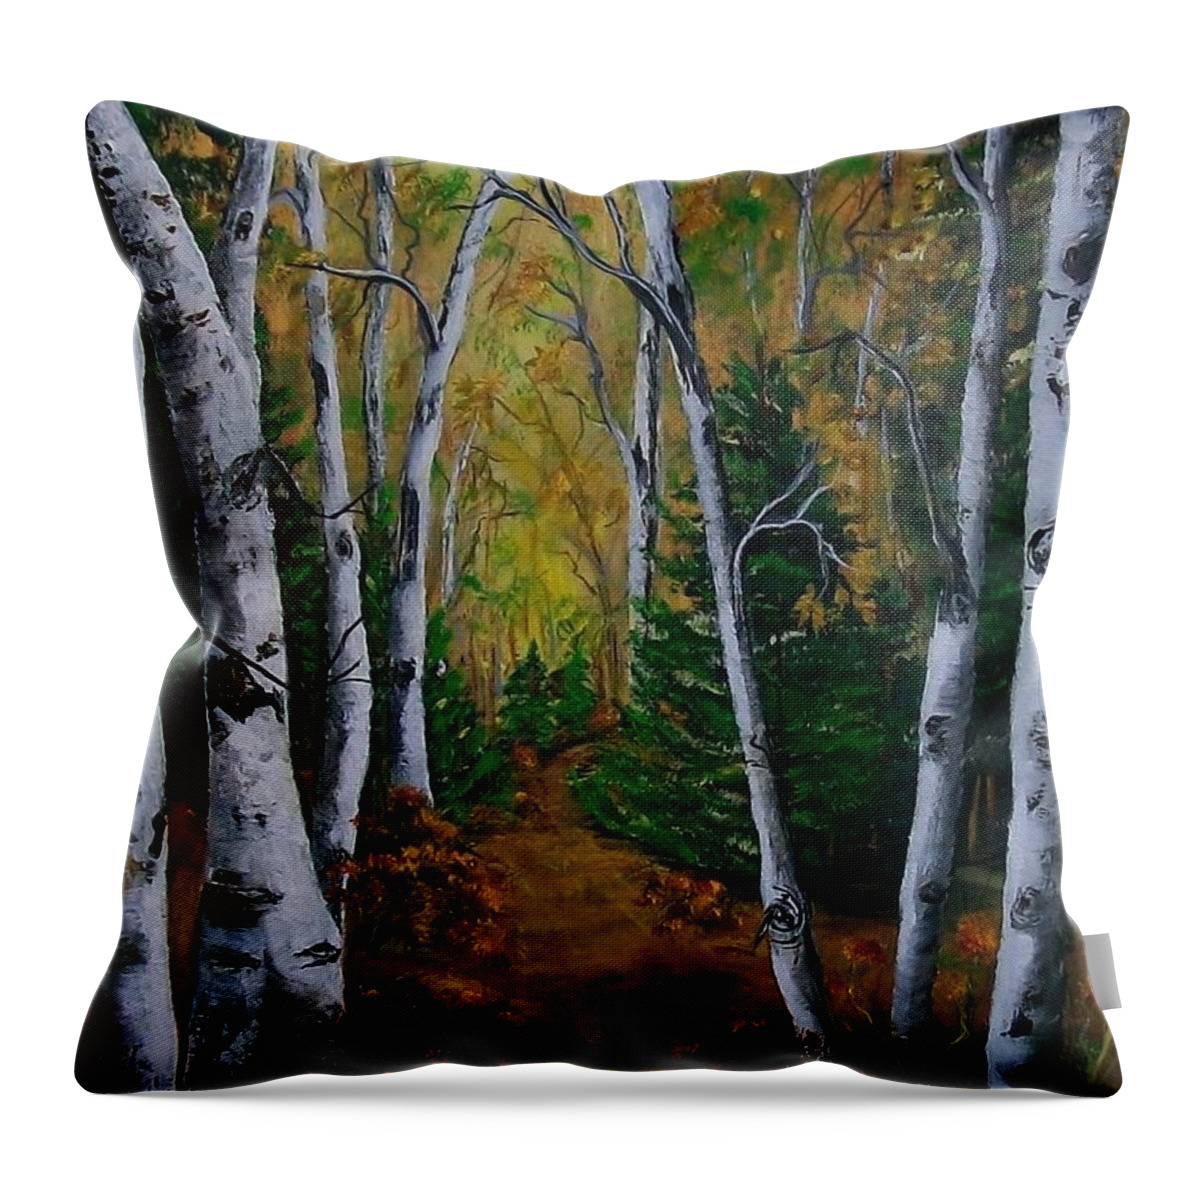 Season Throw Pillow featuring the painting Birch Tree Forest Trail by Sharon Duguay